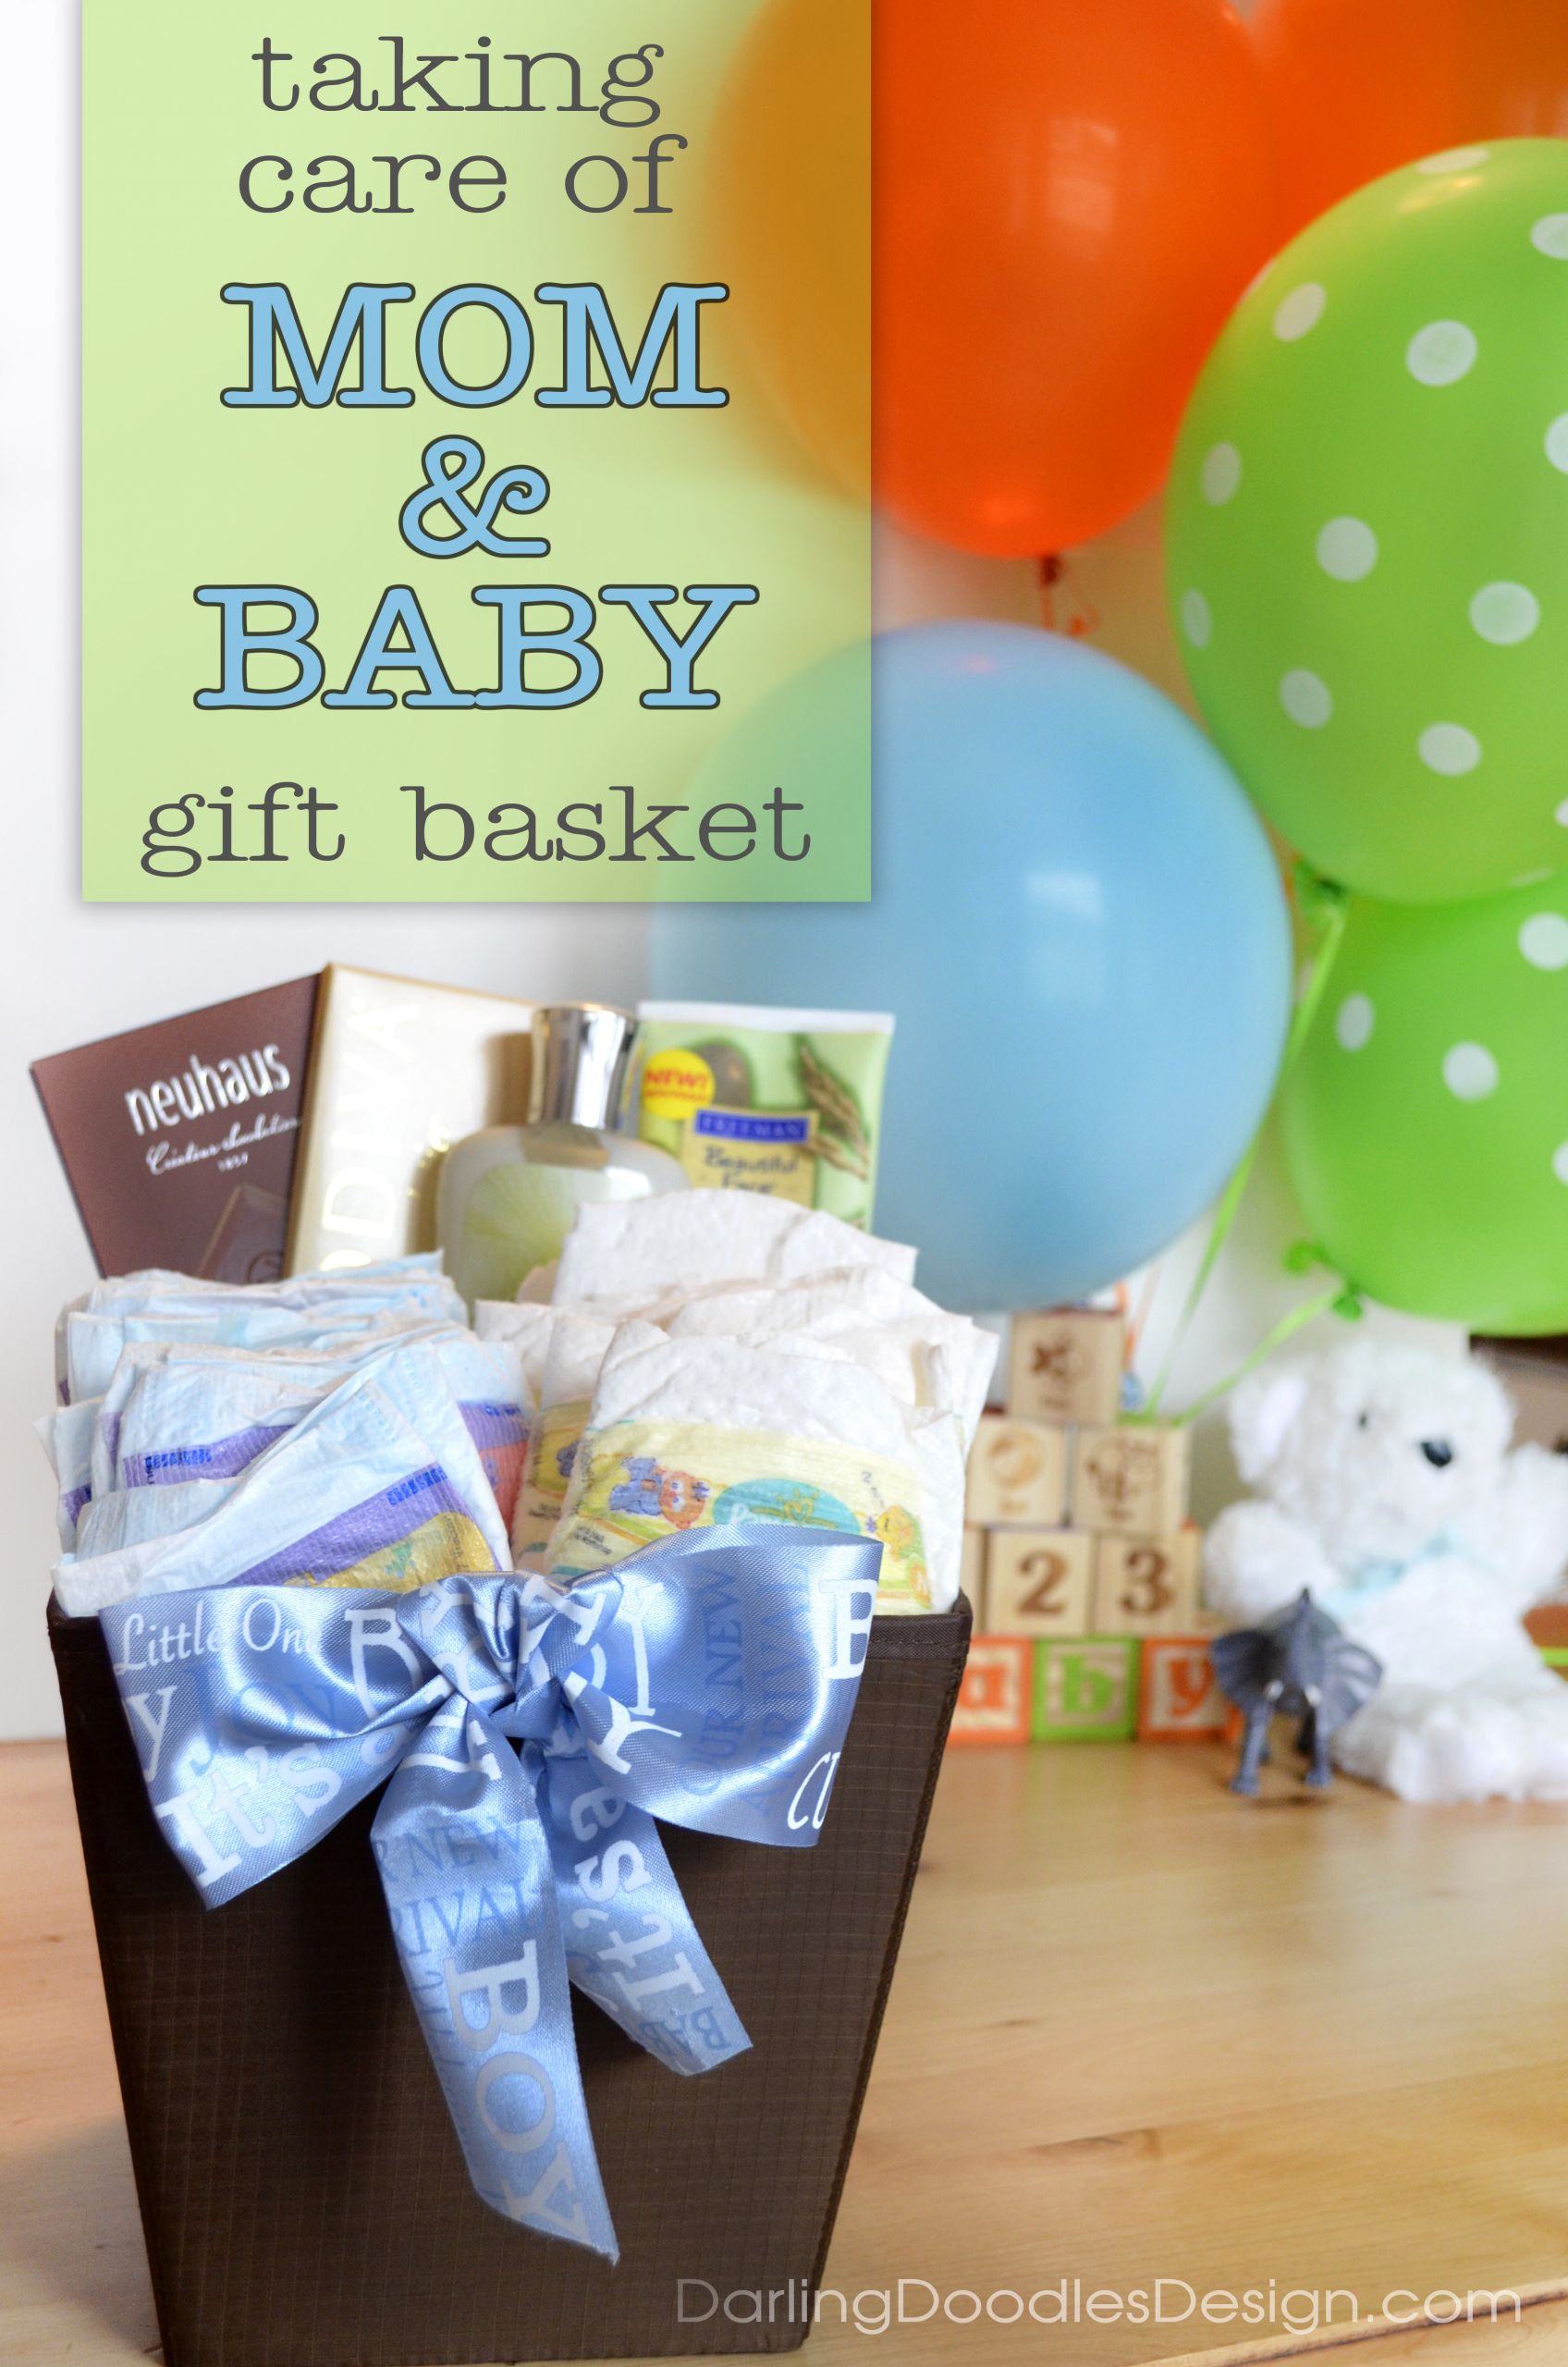 Gifts For Mom Baby Shower
 A Baby Shower Gift for Mom & Baby Darling Doodles